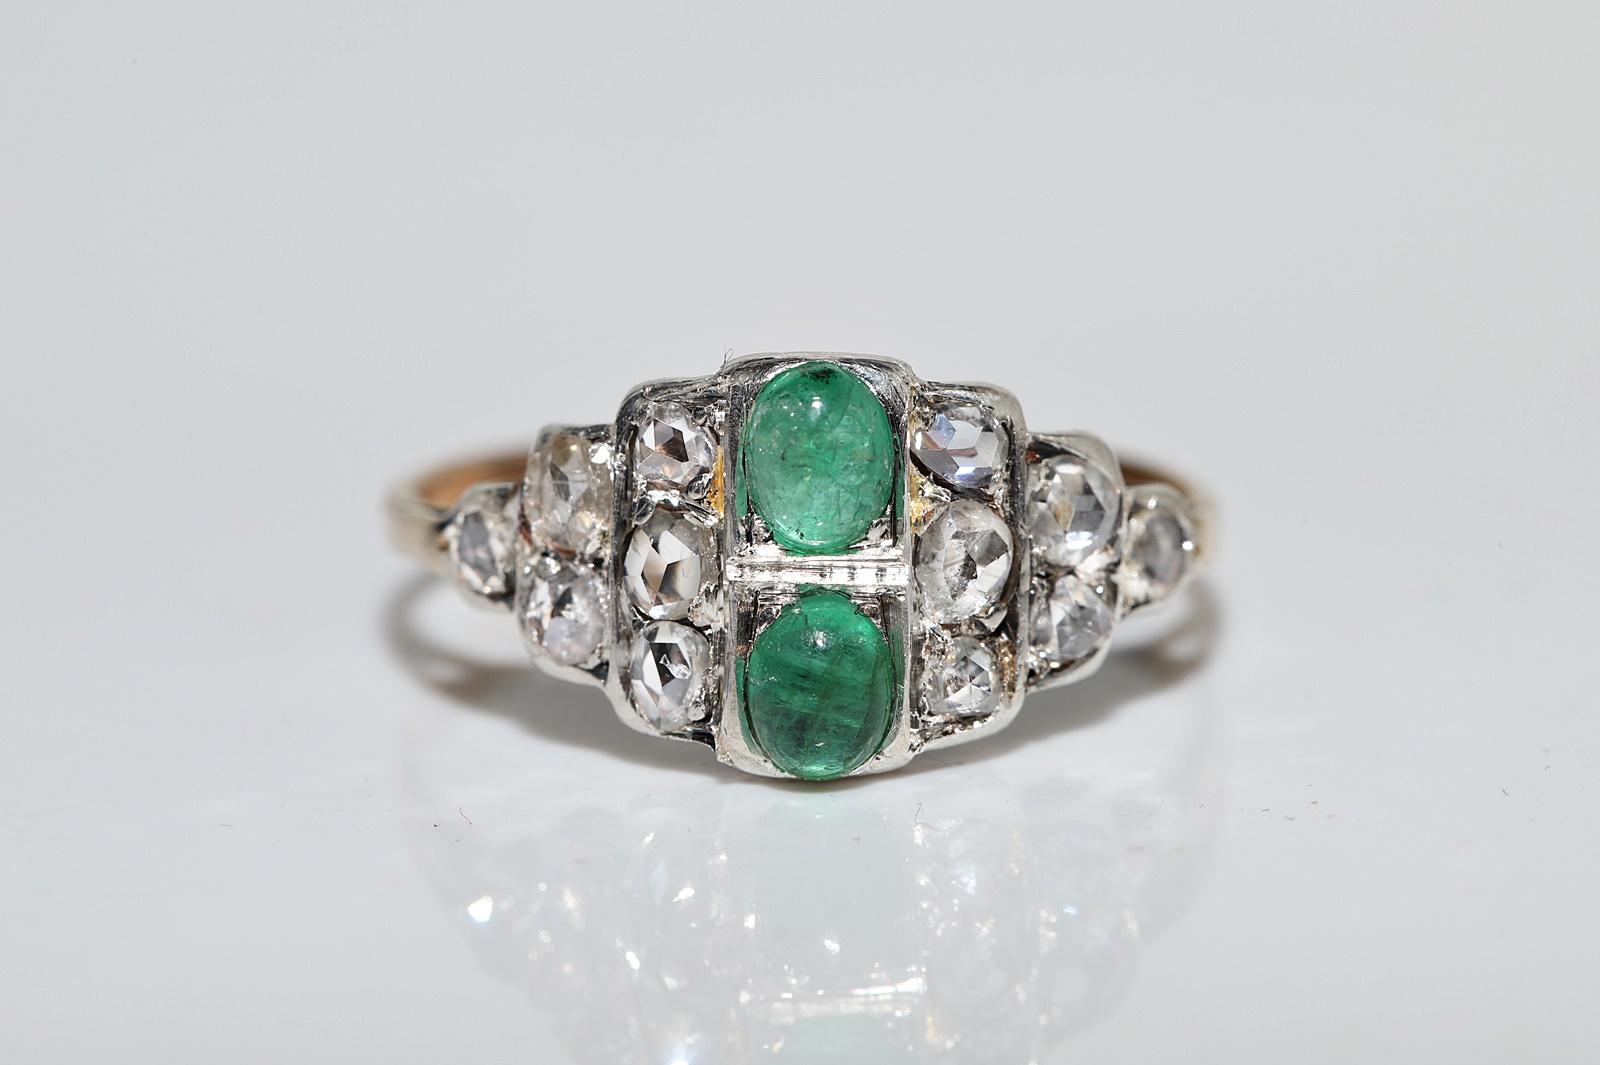 Antique Circa 1900s 14k Gold Top Silver Natural Rose Cut Diamond Emerald Ring For Sale 2